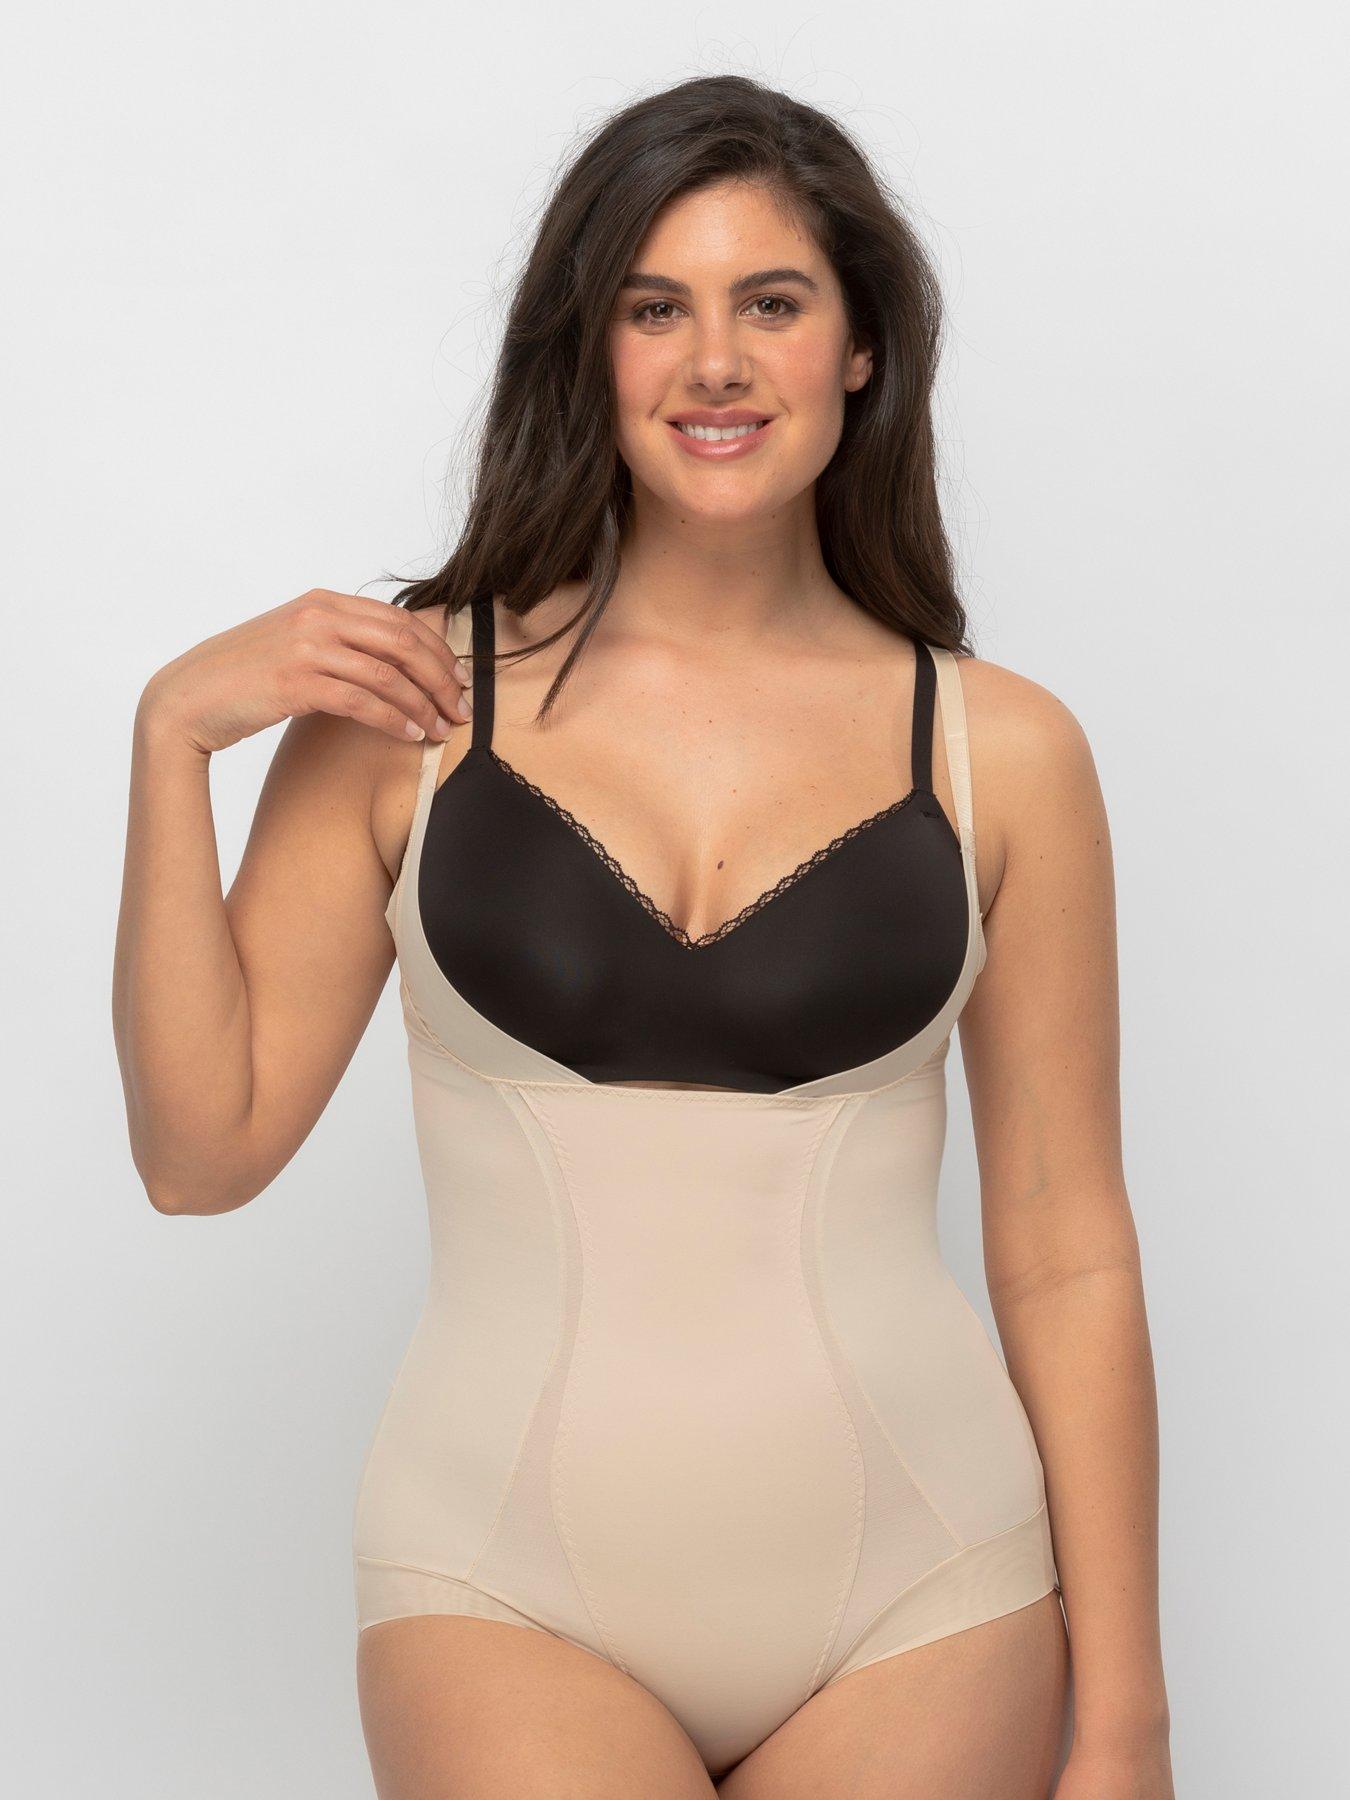 Maidenform Flexees Women's Shapewear Body Briefer with Lace Off